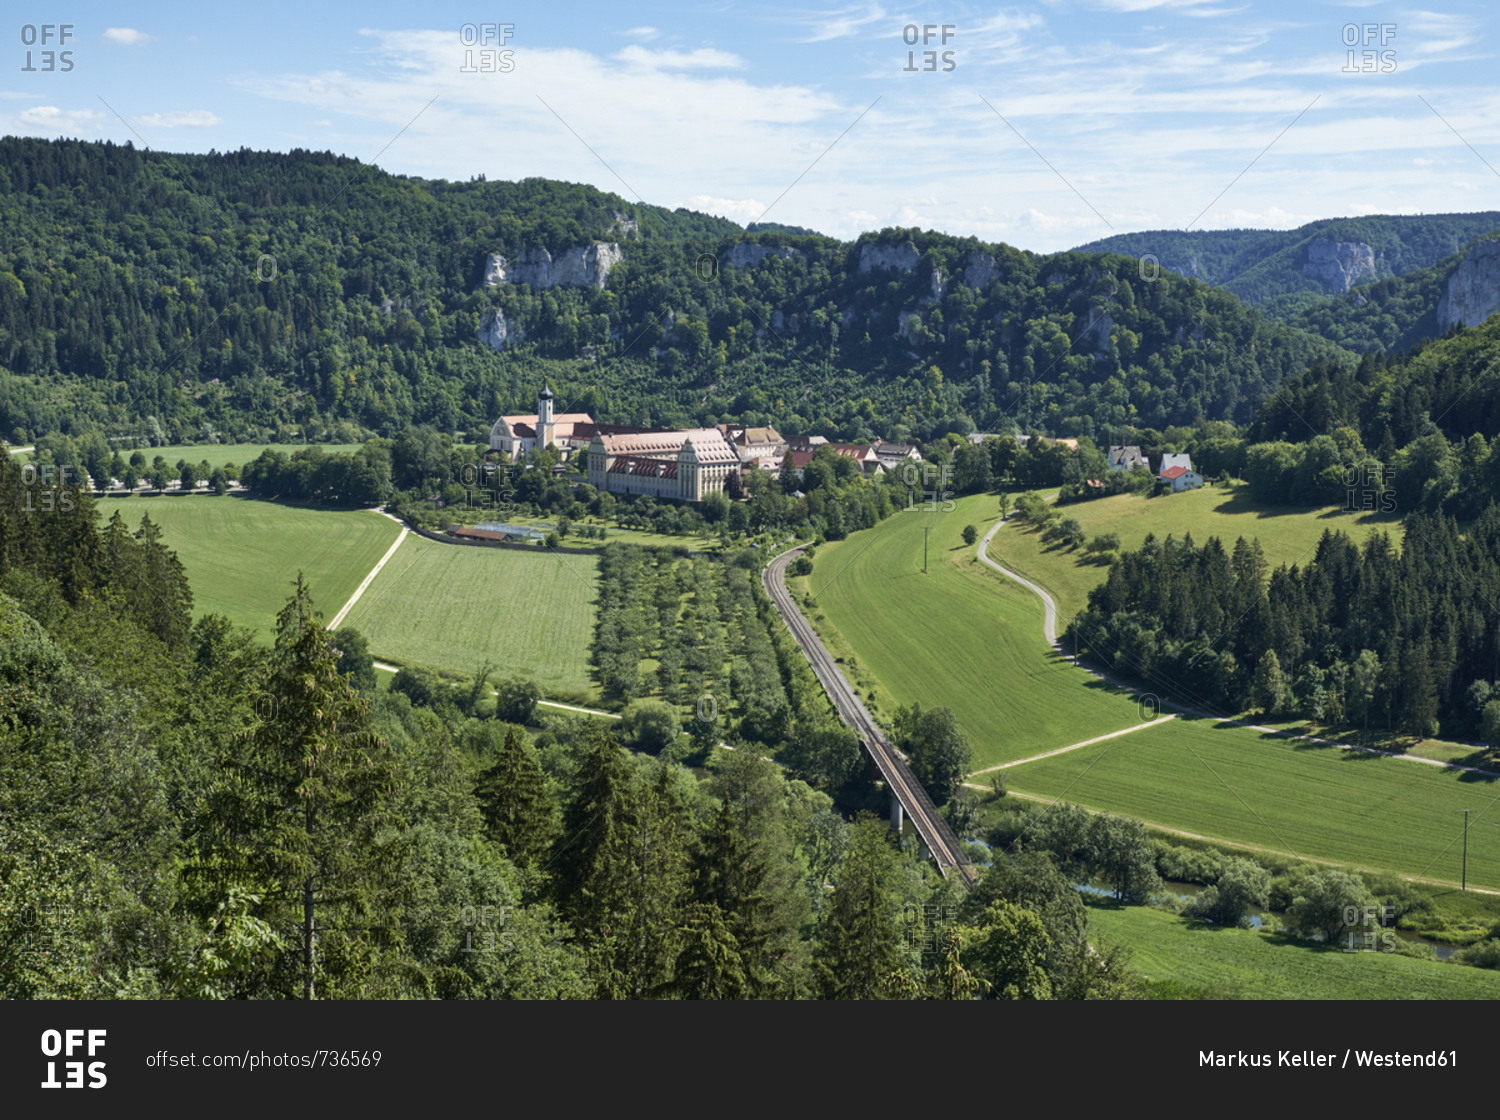 Germany- Baden-Wurttemberg- Tuttlingen district- Danube valley with Beuron monastery